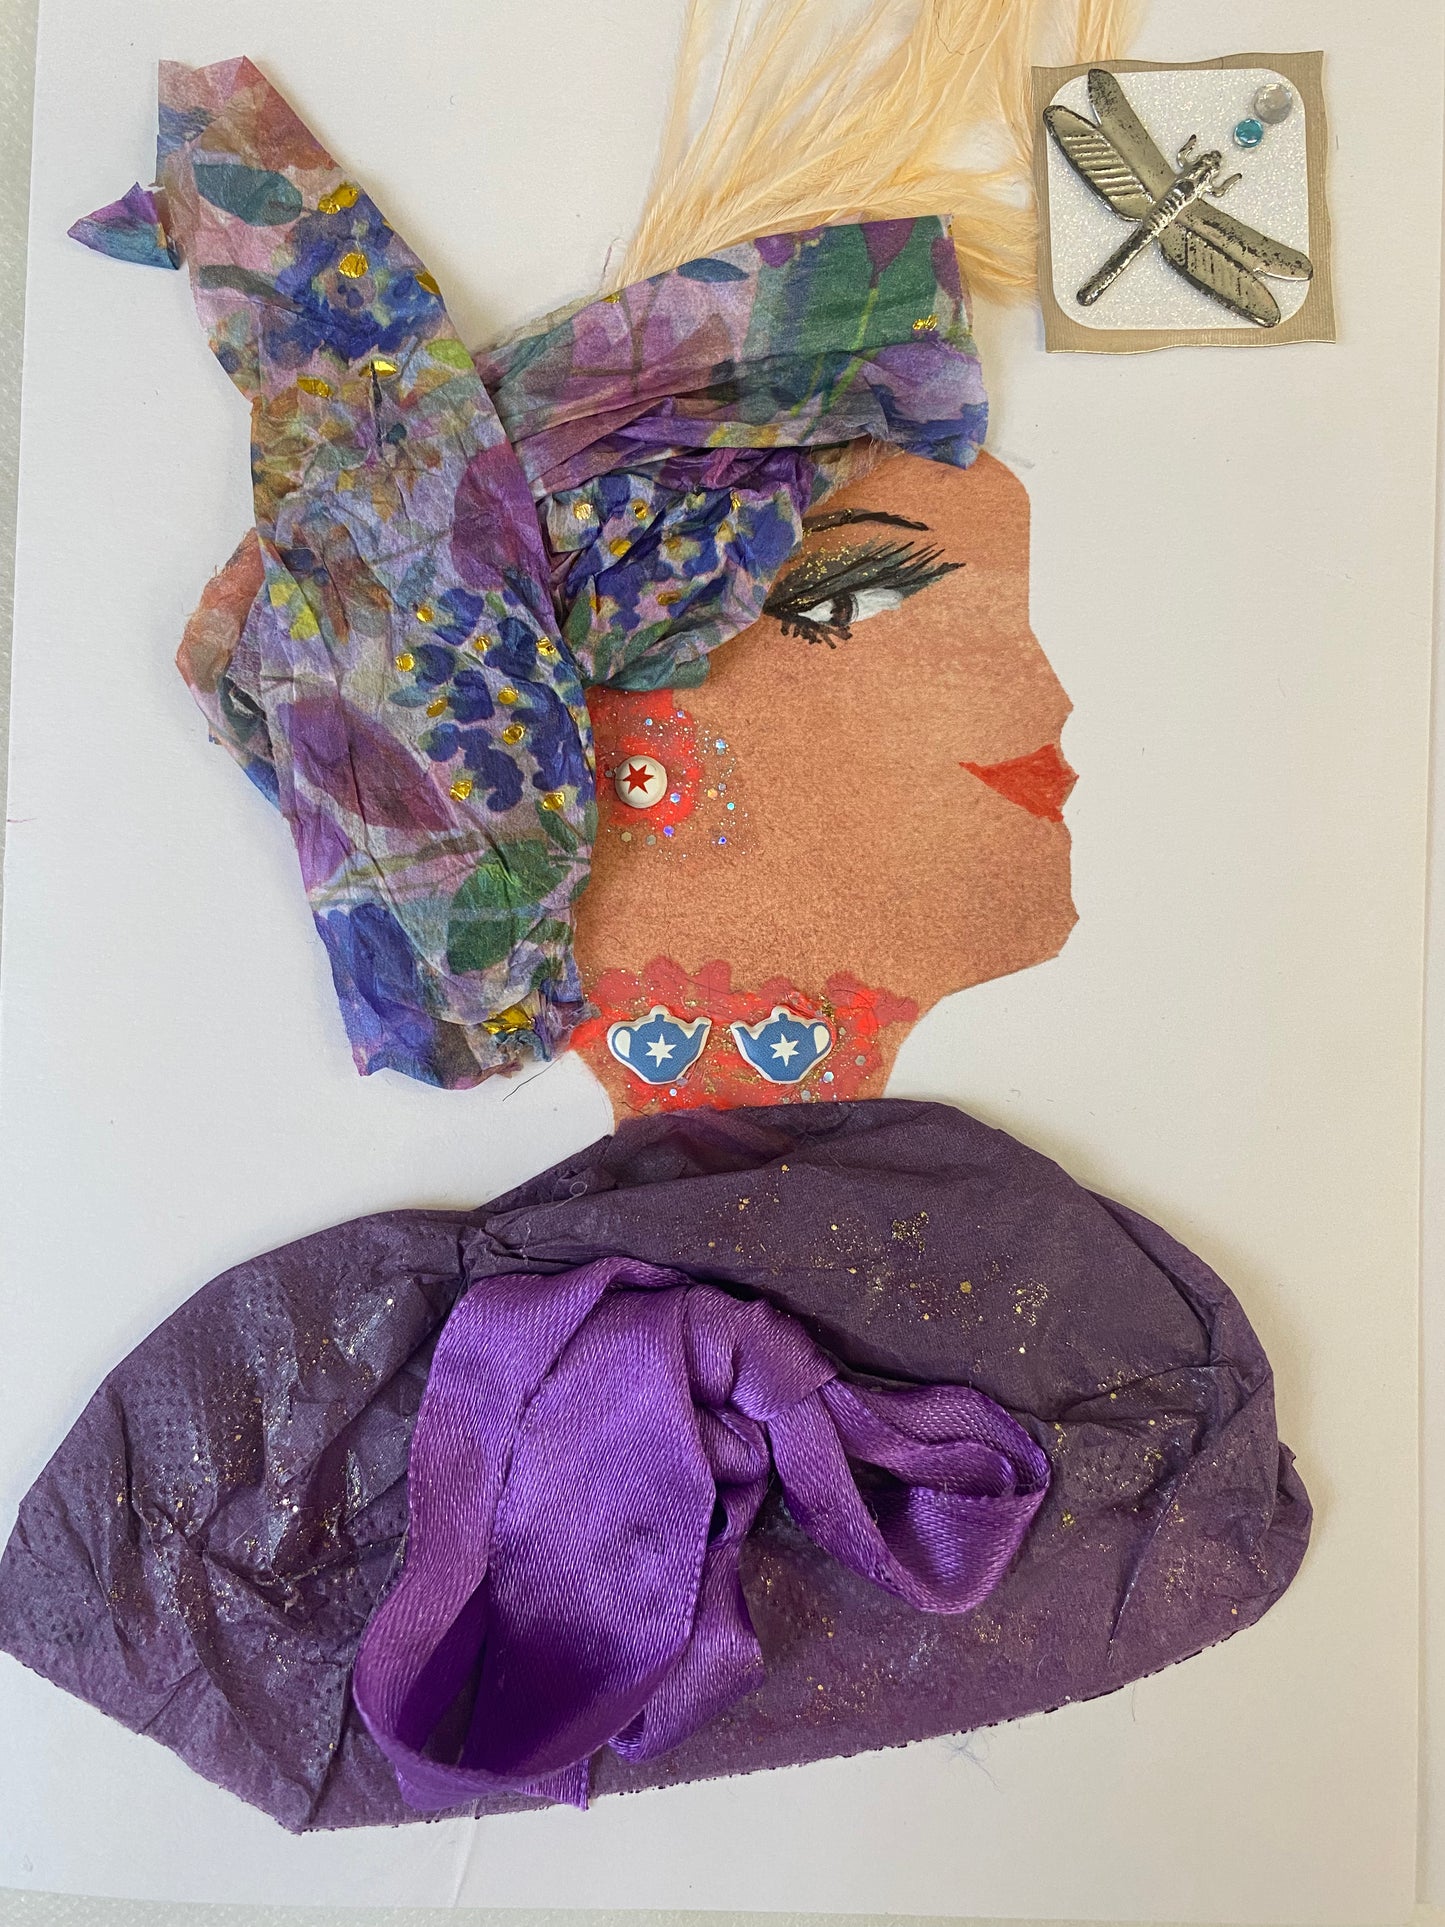 Heather Plum is a unique card featuring a woman with timeless elegance. Her head wrap is printed with intricate detail, while her blouse is a beautiful shade of purple. The finishing touch is provided by the subtle yet eye-catching orange jewellery. A dragon fly symbol adds an extra layer of sophistication.